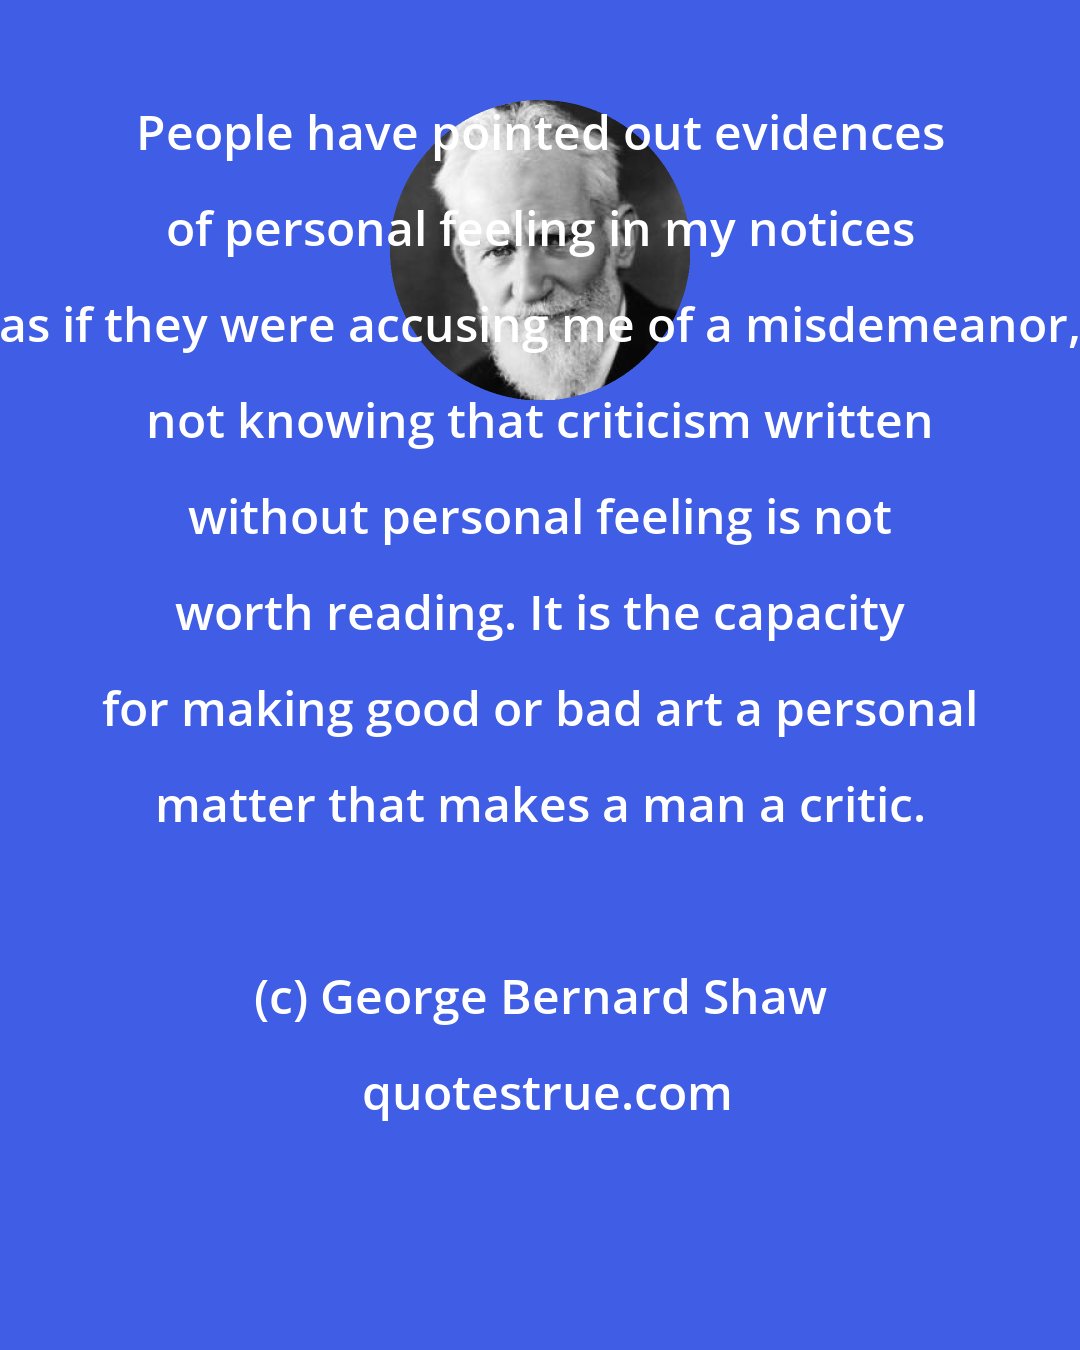 George Bernard Shaw: People have pointed out evidences of personal feeling in my notices as if they were accusing me of a misdemeanor, not knowing that criticism written without personal feeling is not worth reading. It is the capacity for making good or bad art a personal matter that makes a man a critic.